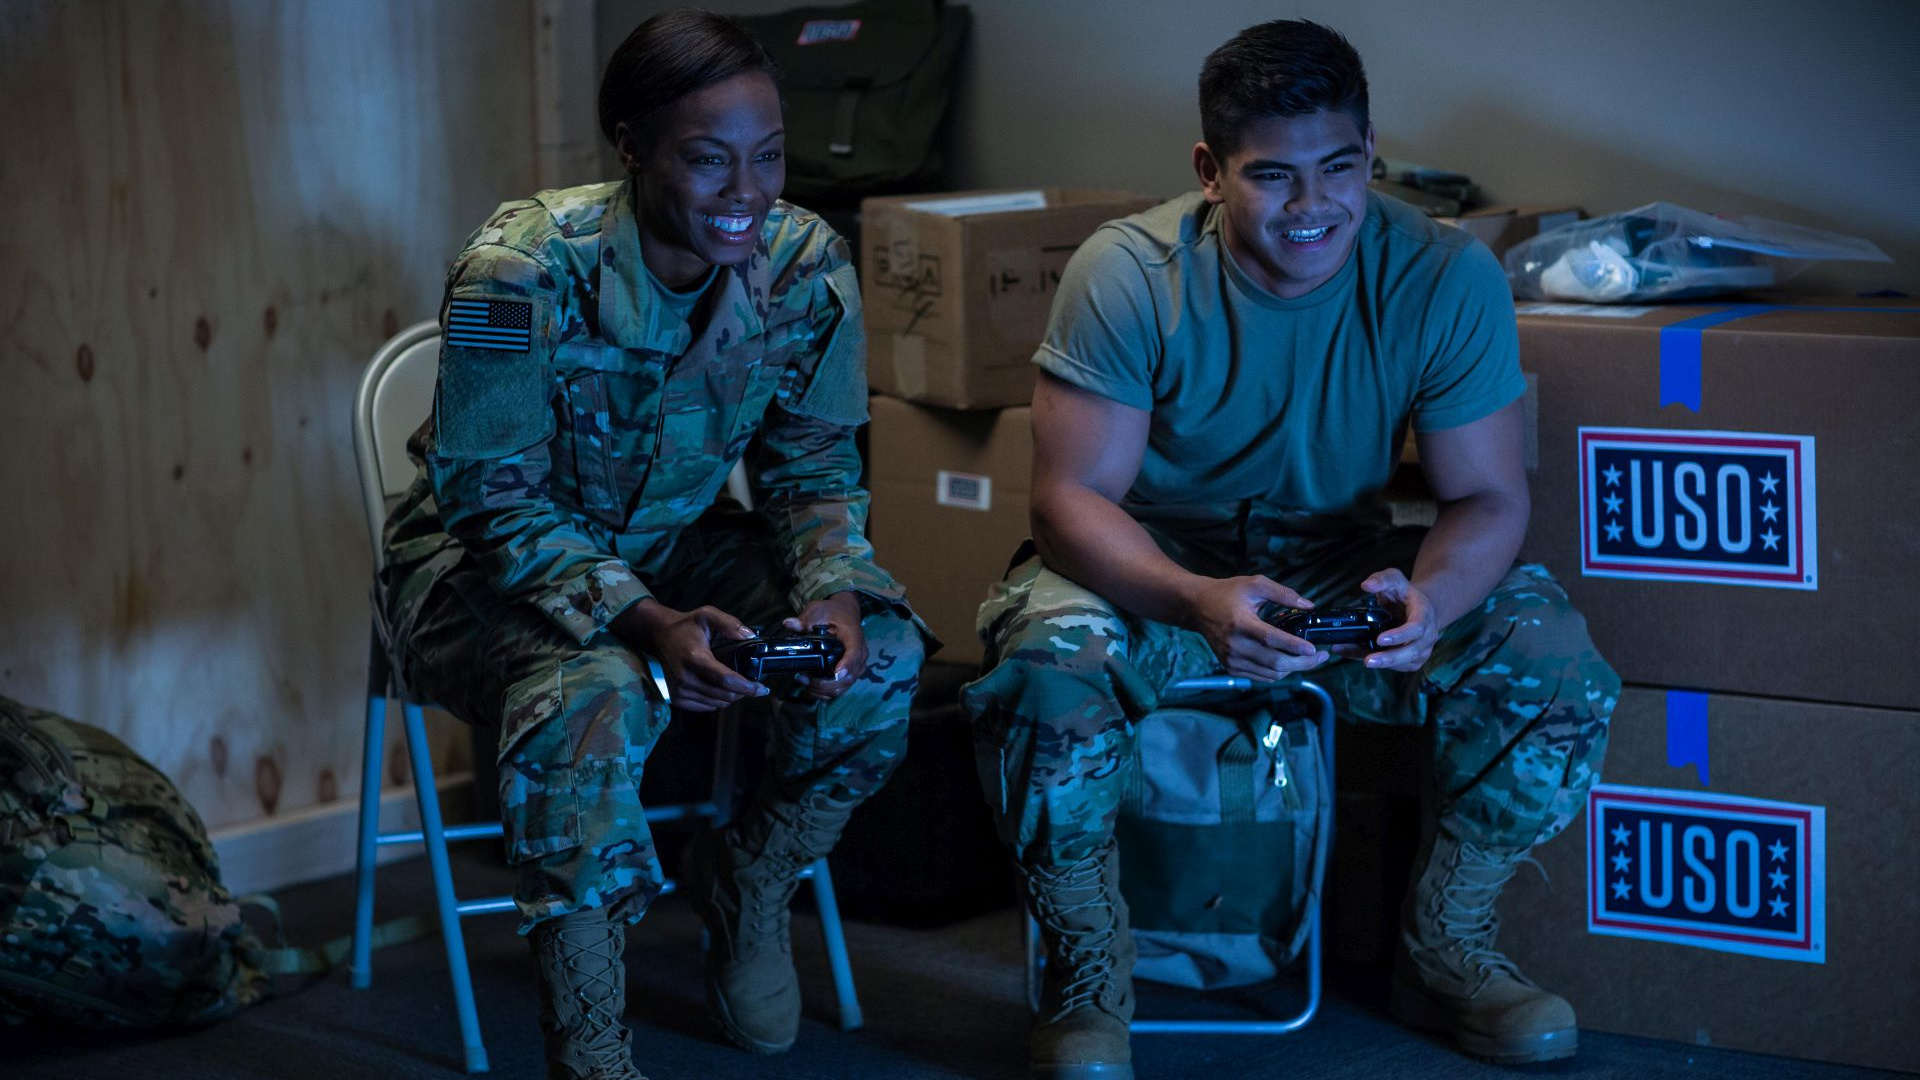 Xbox Partners with USO to Support Military Service Members and Their Families